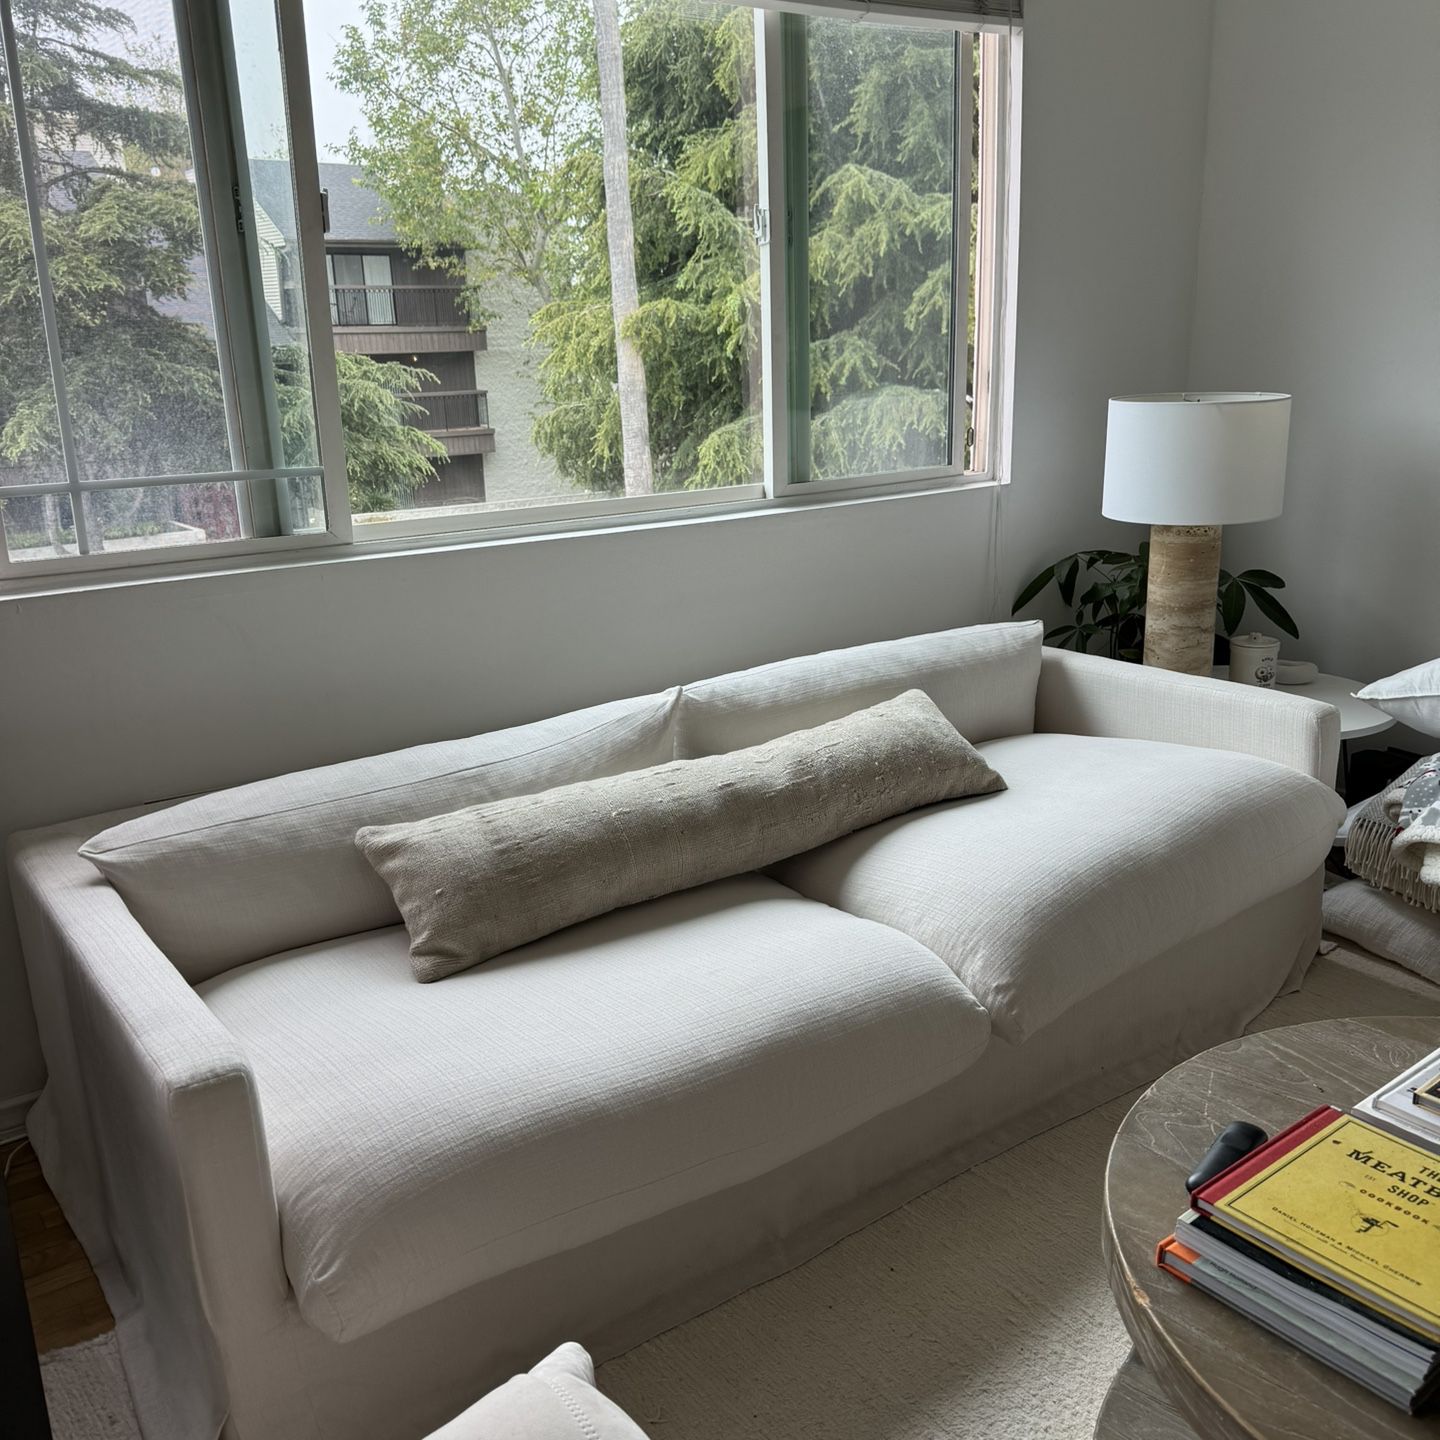 White Couch For Sale (Matching sofa Chair Included)